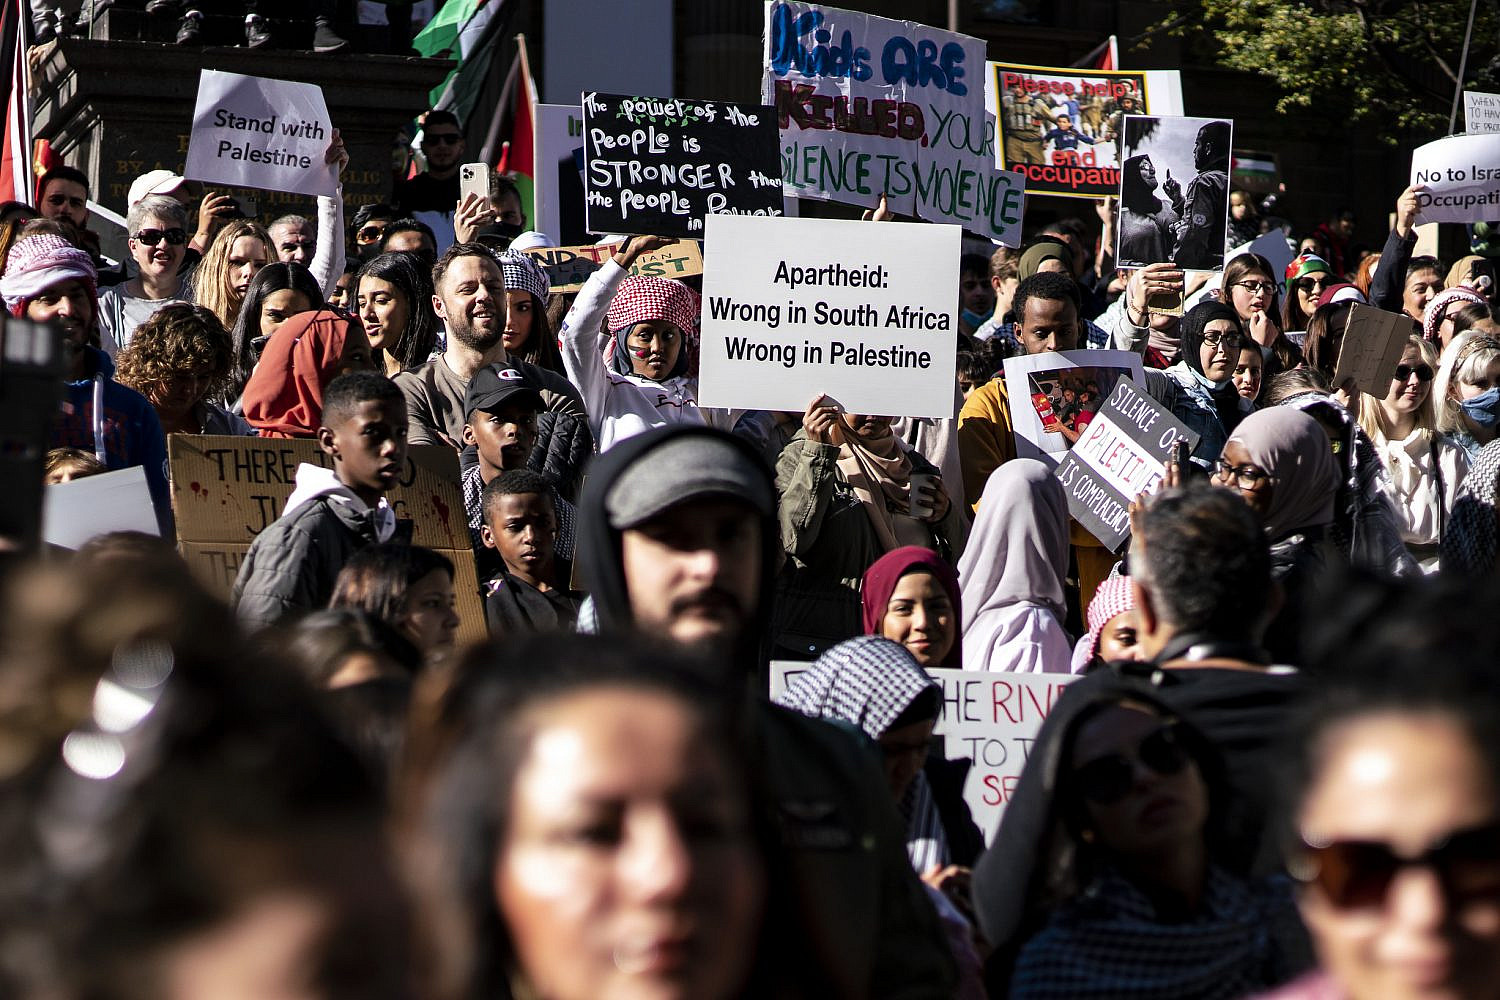 Supporters of Palestine and Palestinian justice in the streets of Melbourne, Australia (20,000 to 25,000 people) for the second rally in two weeks, May 22, 2021. (Matt Hrkac/CC BY 2.0)